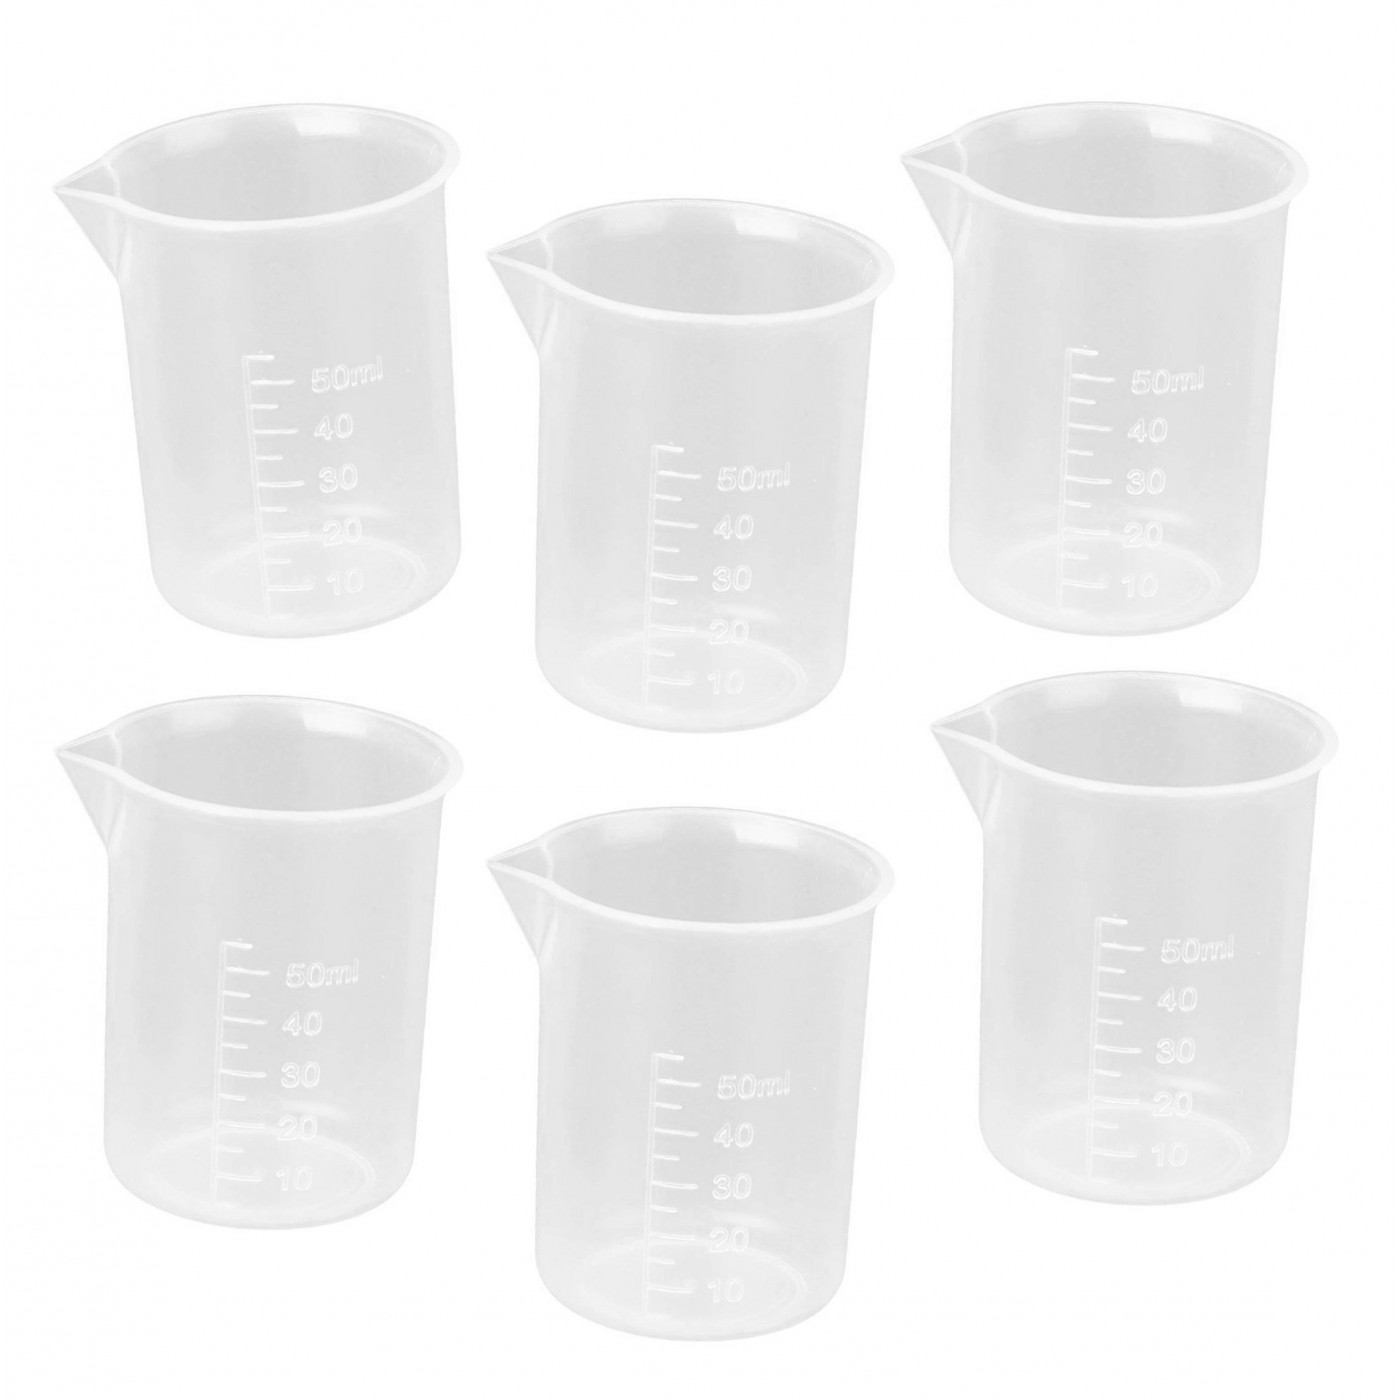 https://www.woodtoolsanddeco.com/4530-large_default/set-of-30-mini-measuring-cups-50-ml-transparent-pp-for-frequent-use.jpg